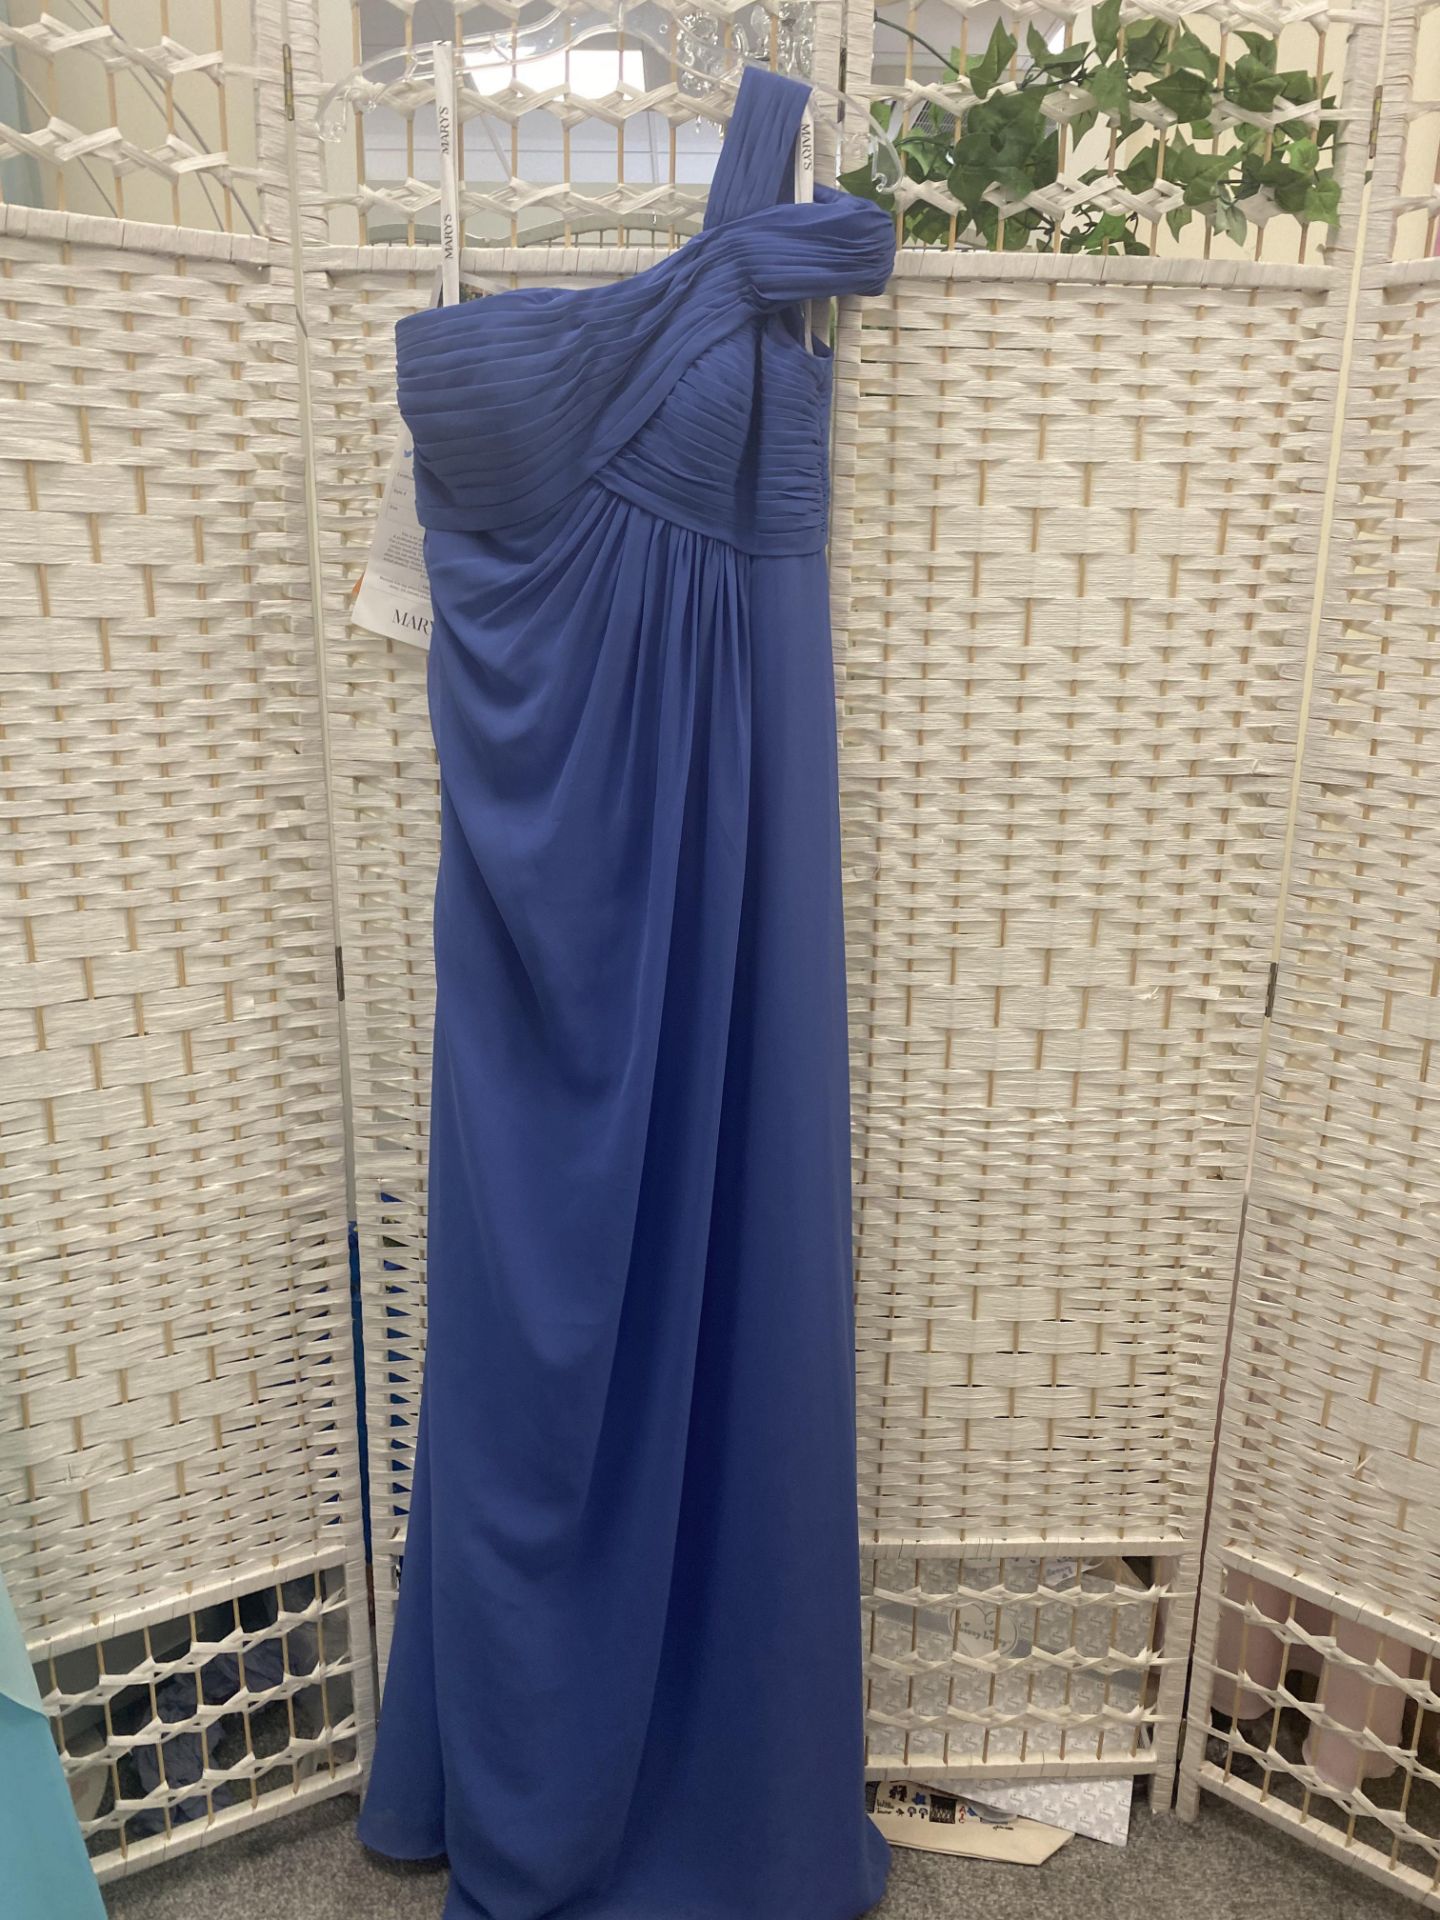 Mary's Bridal Style 7050 Size 10 Mediterranean Blue - Image 4 of 7